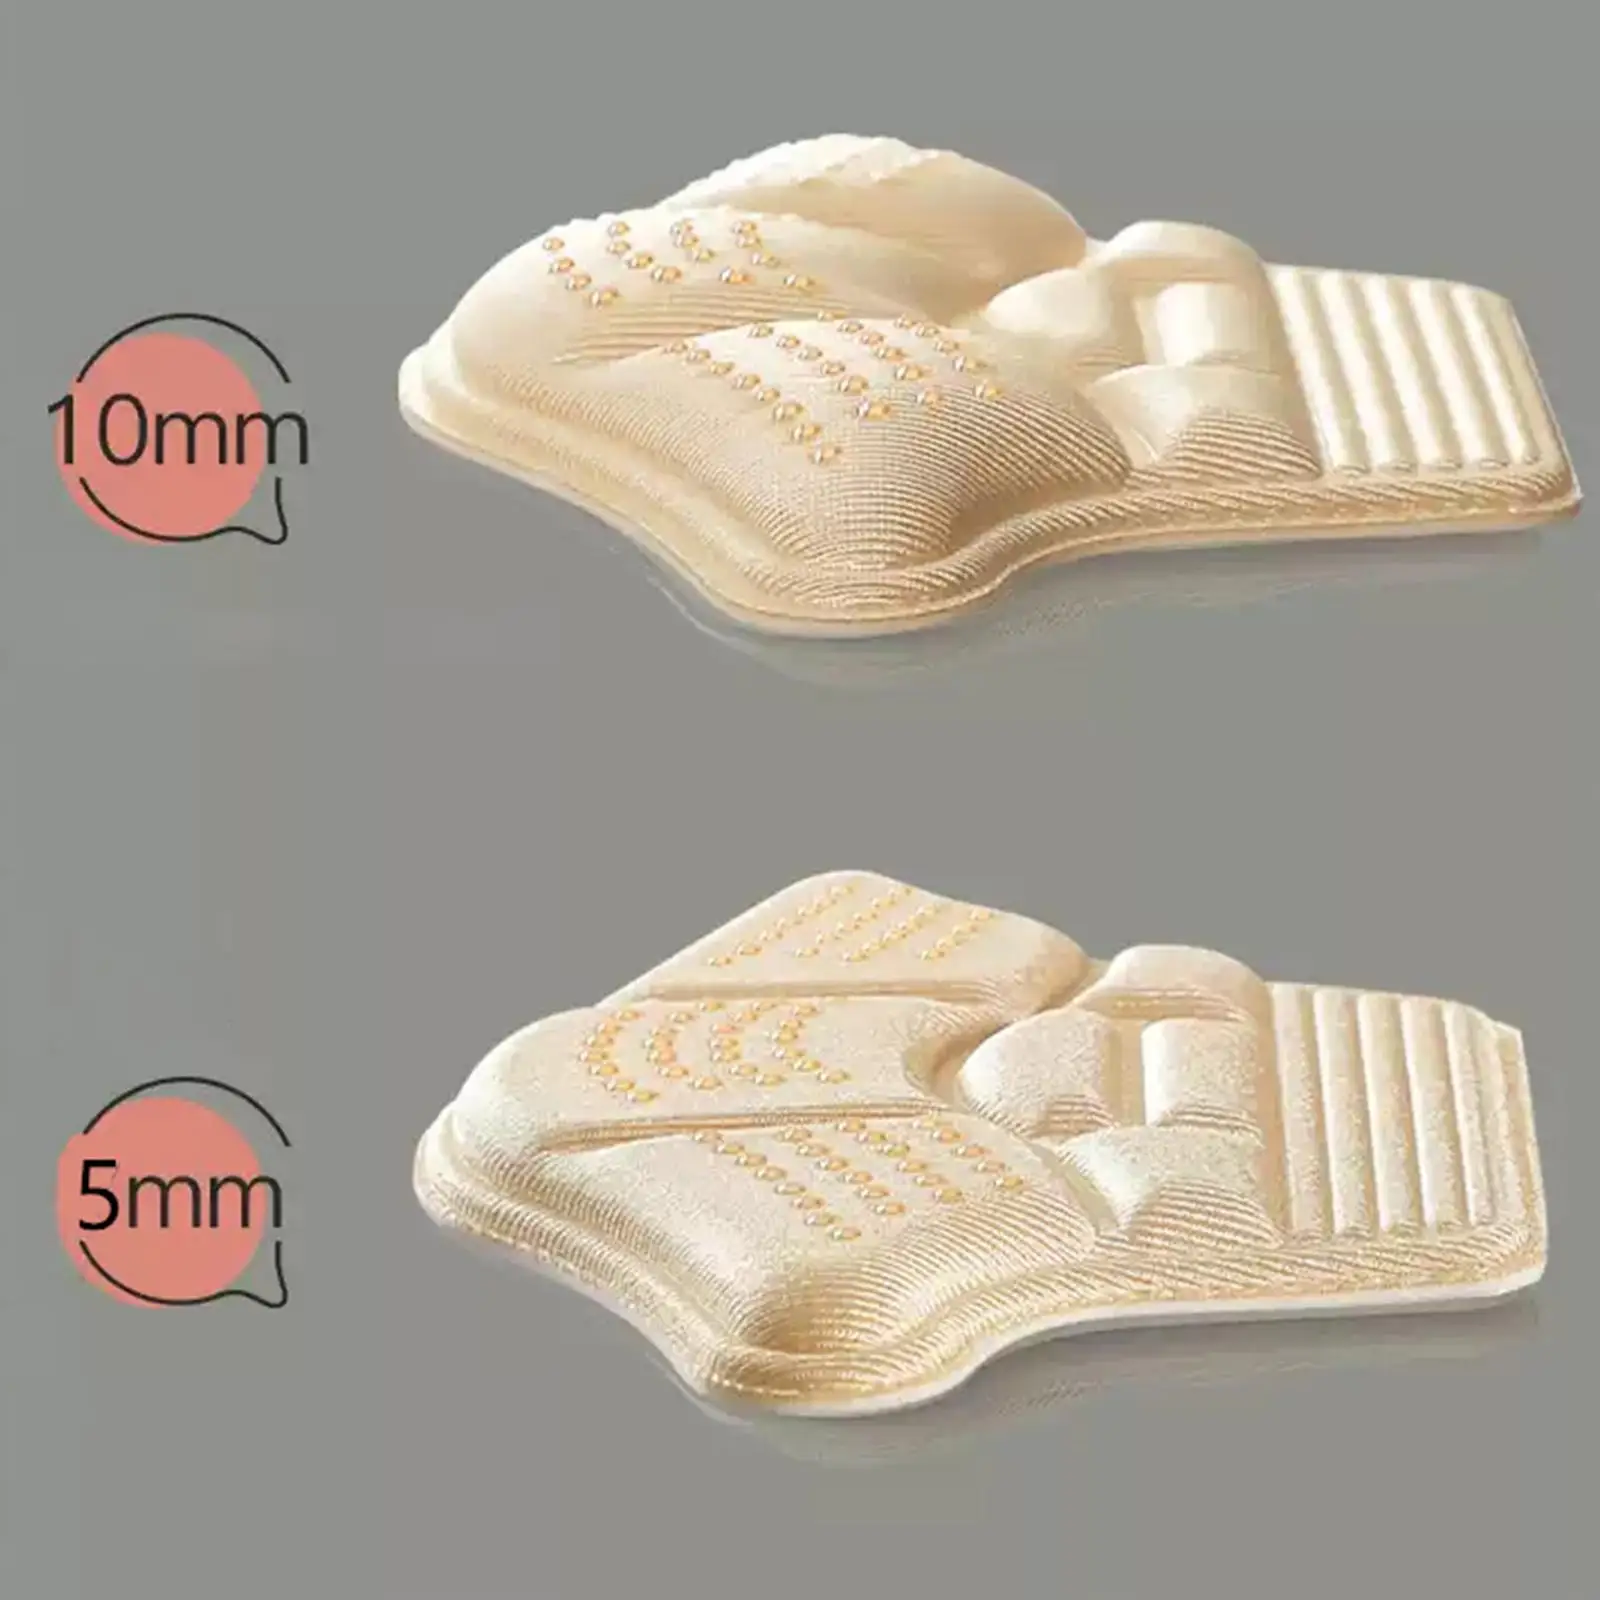 Heel Cushion Pads Shoe Inserts Insoles Protector for Preventing Heel Pains Sport Shoes Pain Relief Antiwear Feet Pad Protector